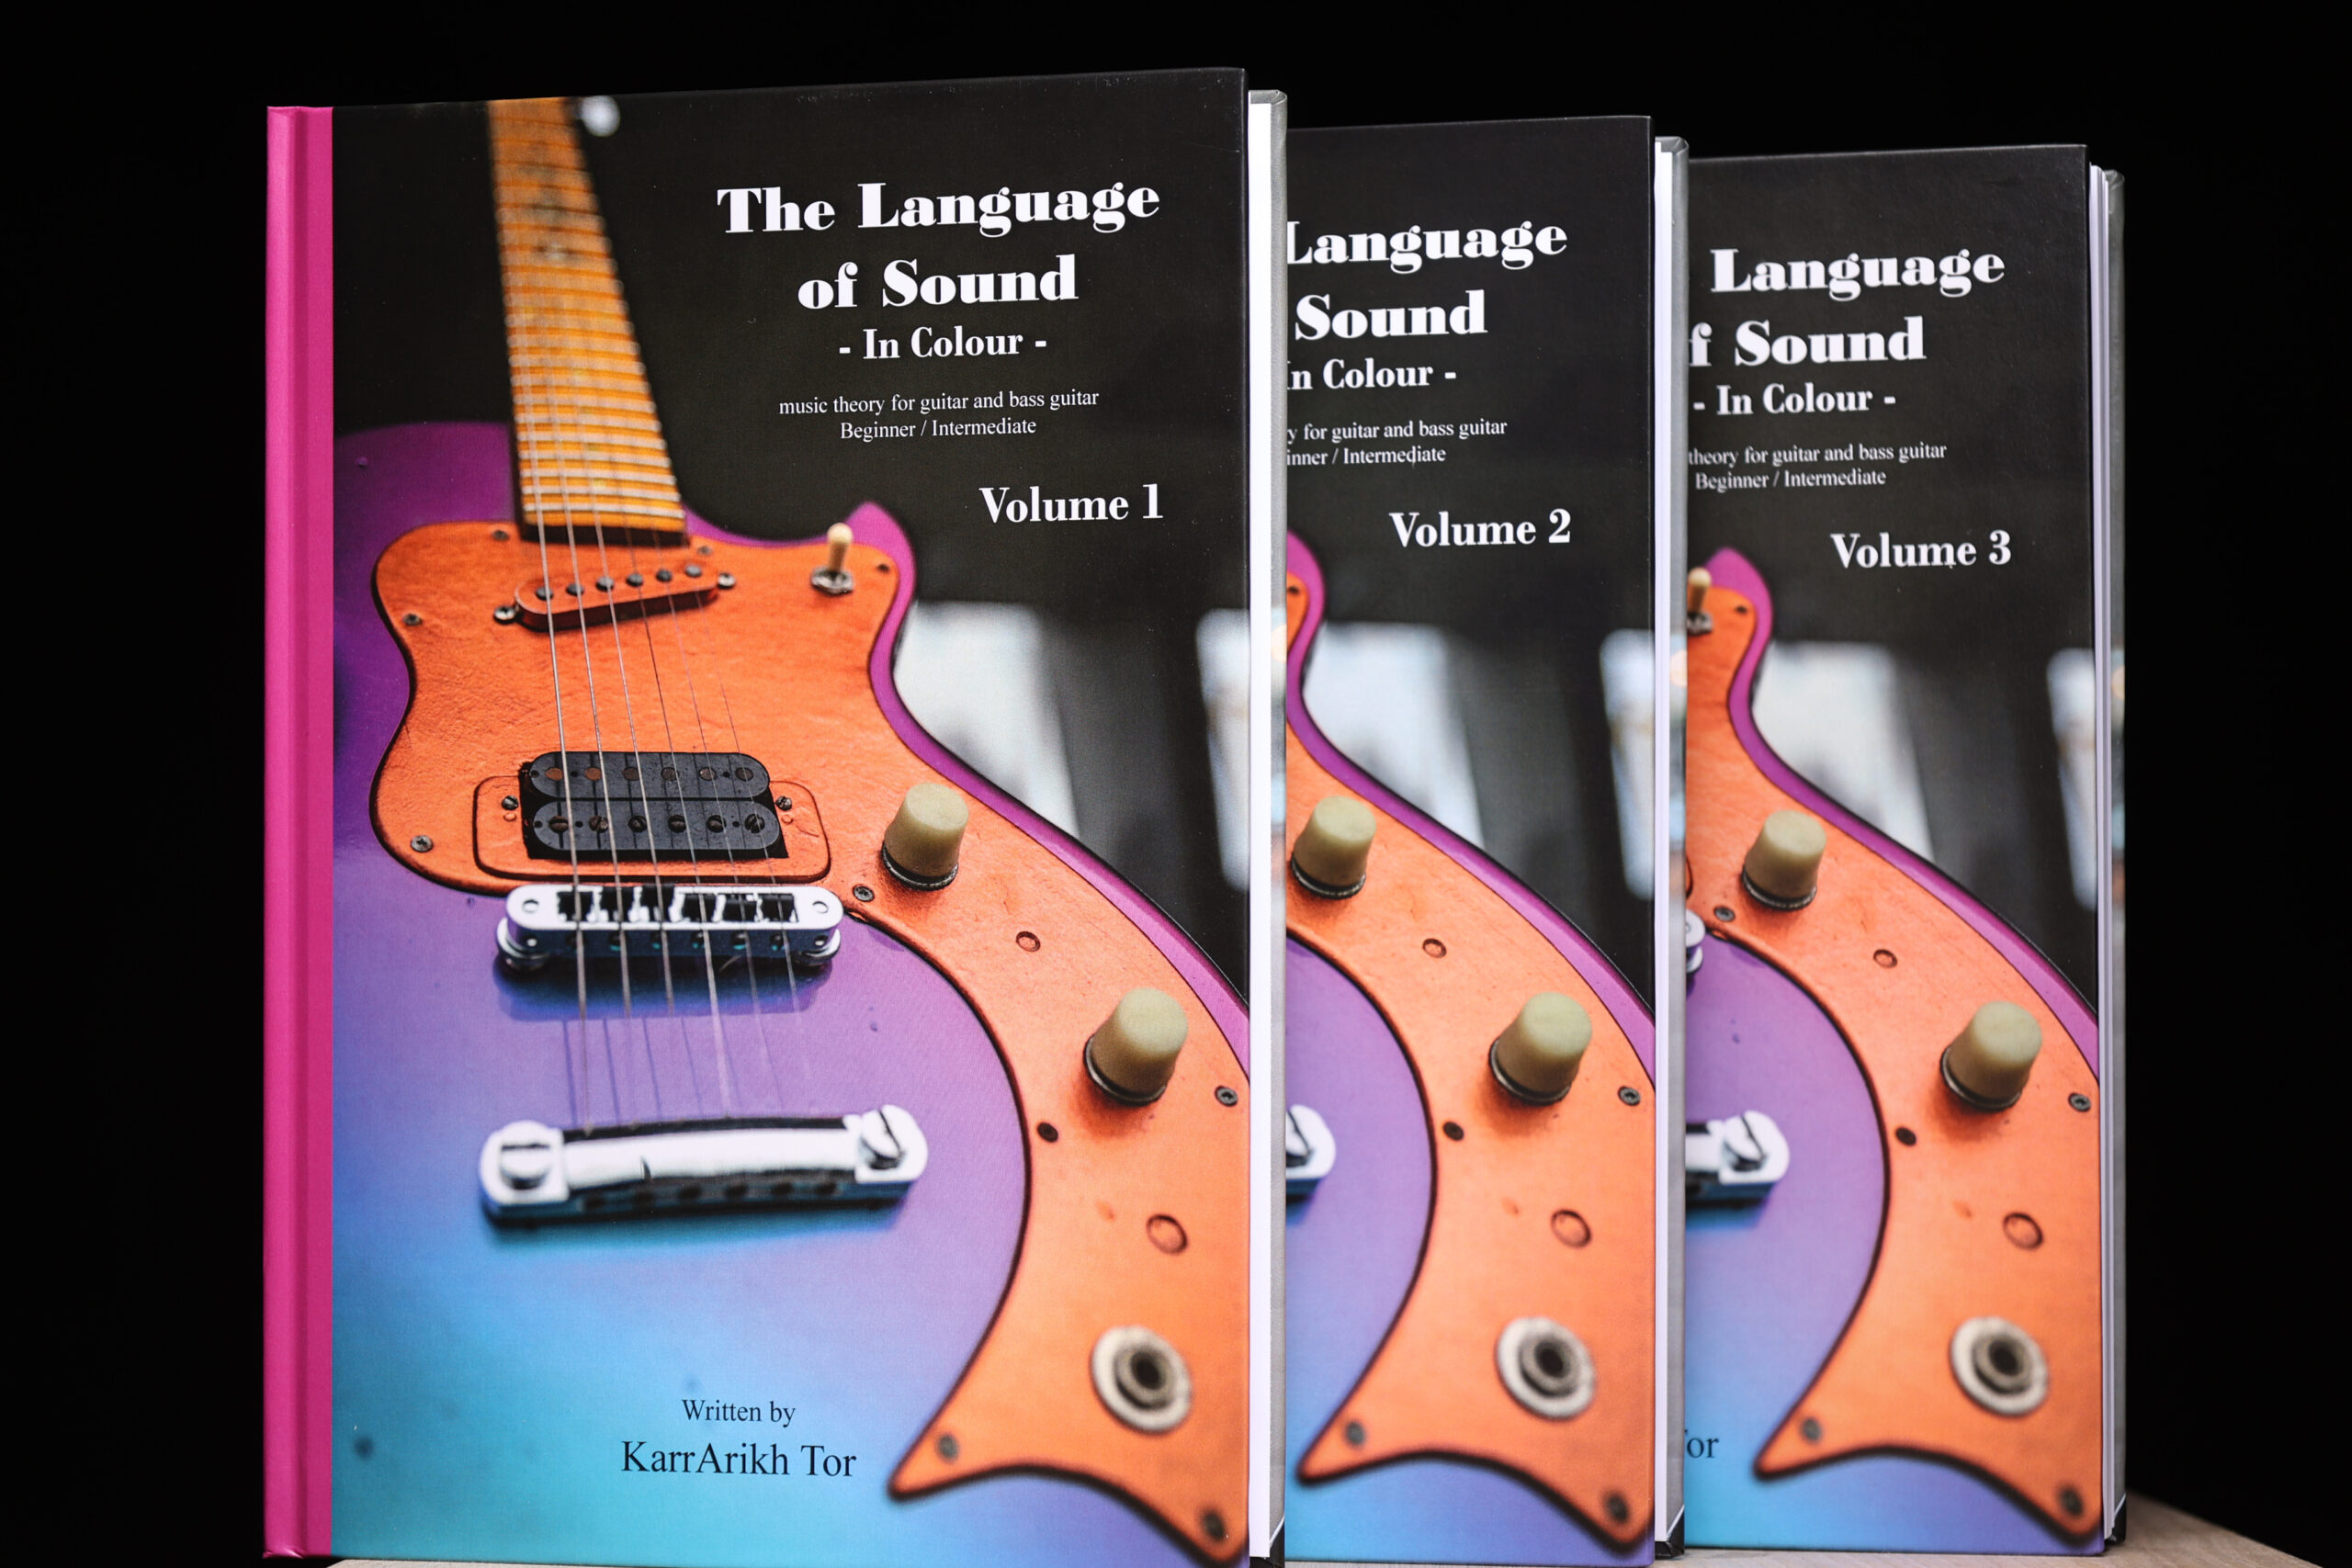 The Language of Sound - in colour, Volumes 1-3